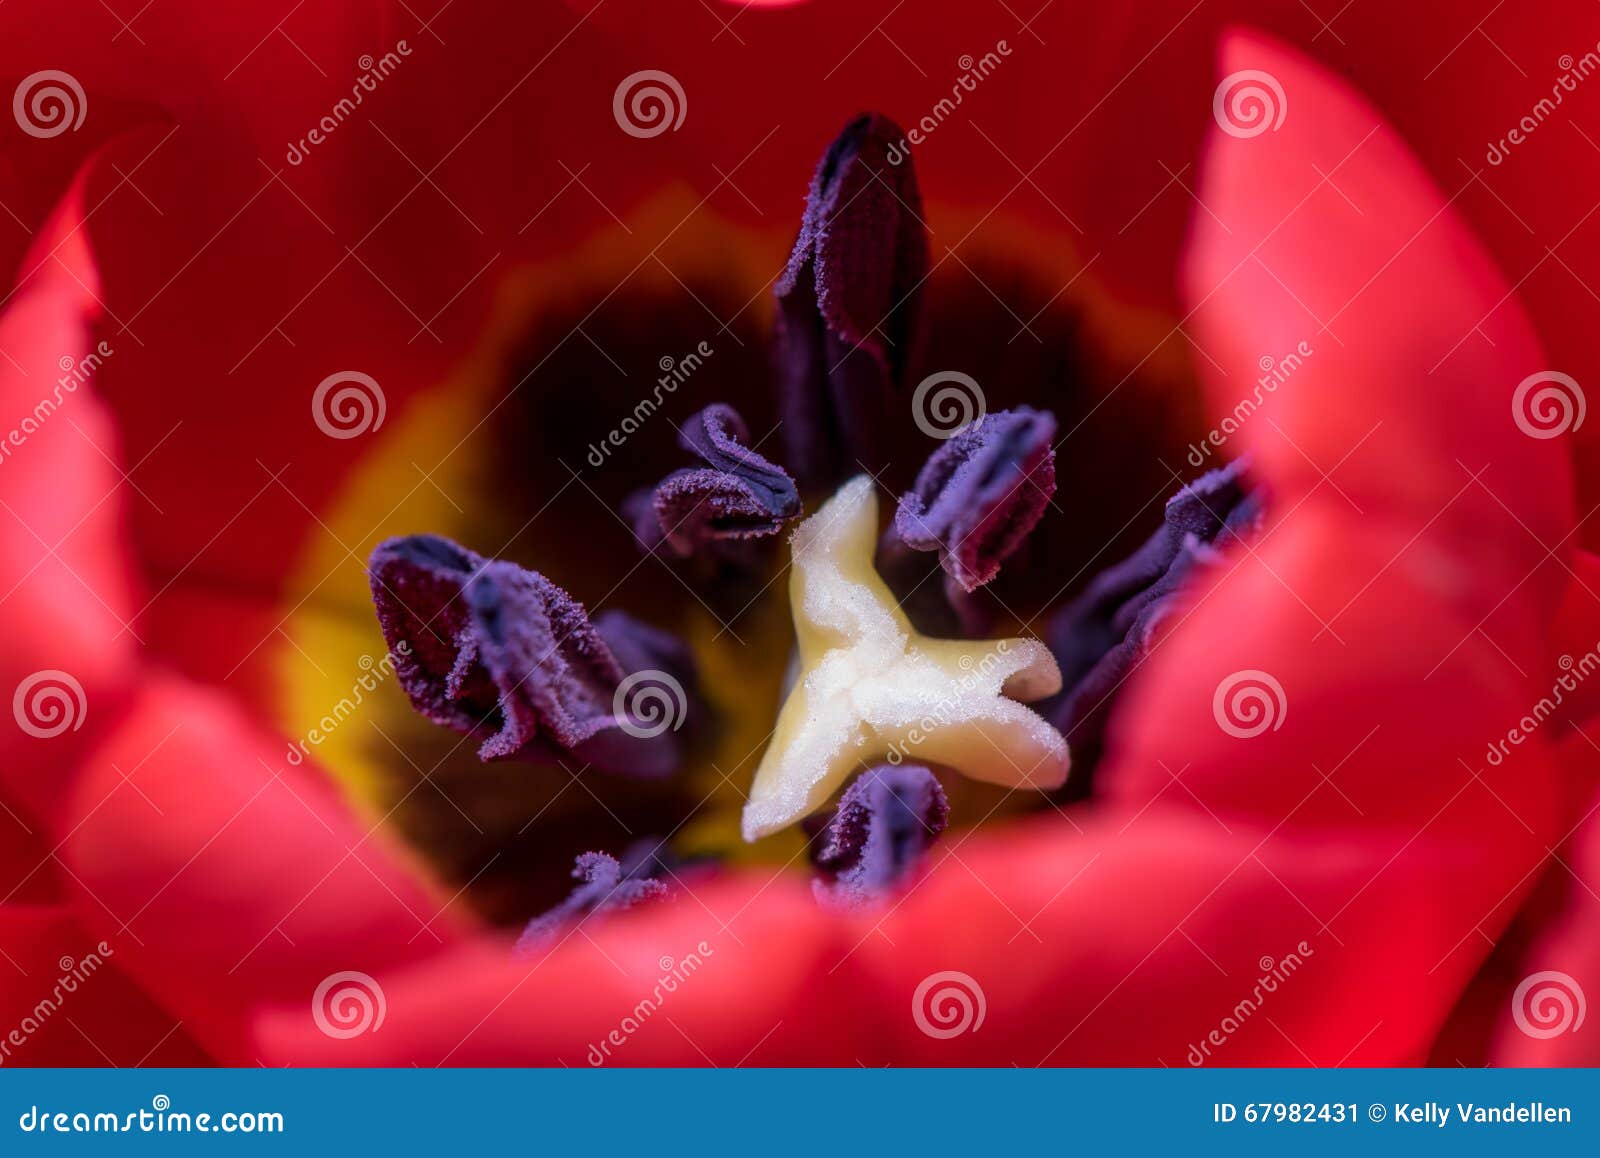 anther inside a tulip